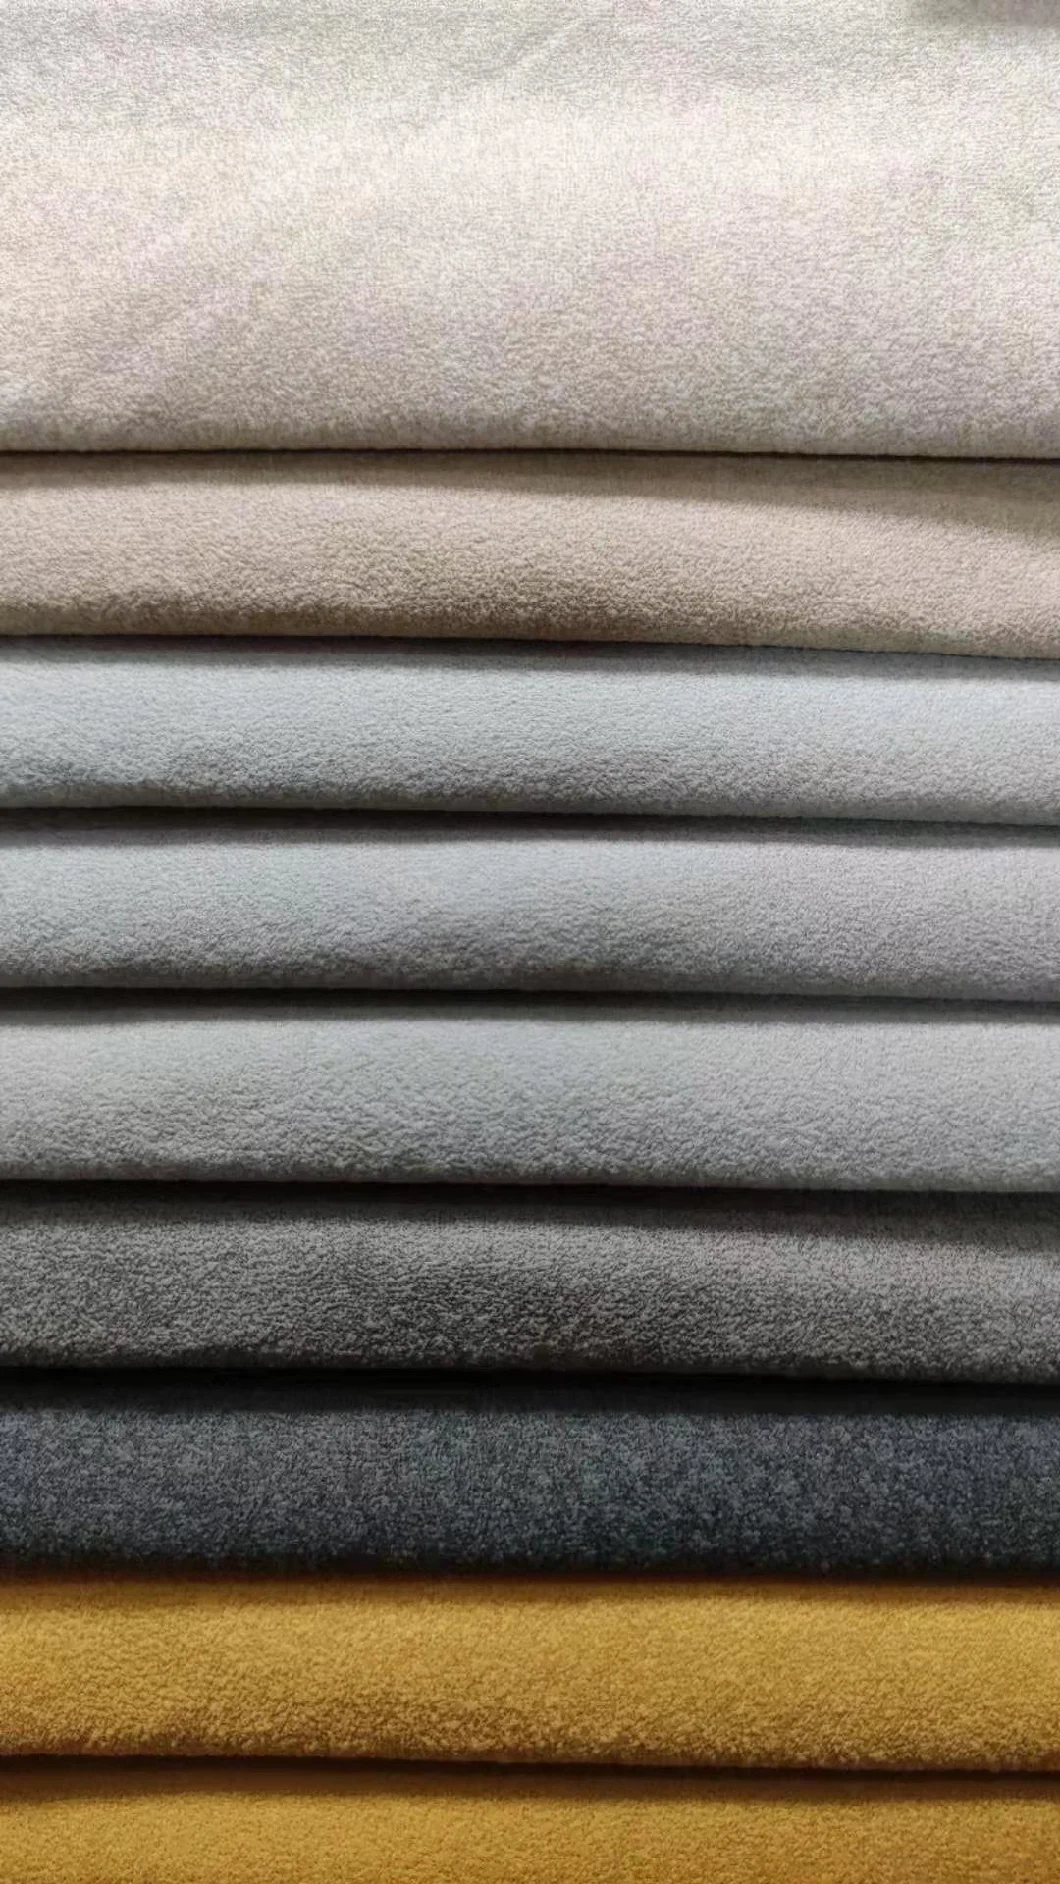 Sofa Fabric for Upholstery Cushion Cover 100% Polyester Linen Look